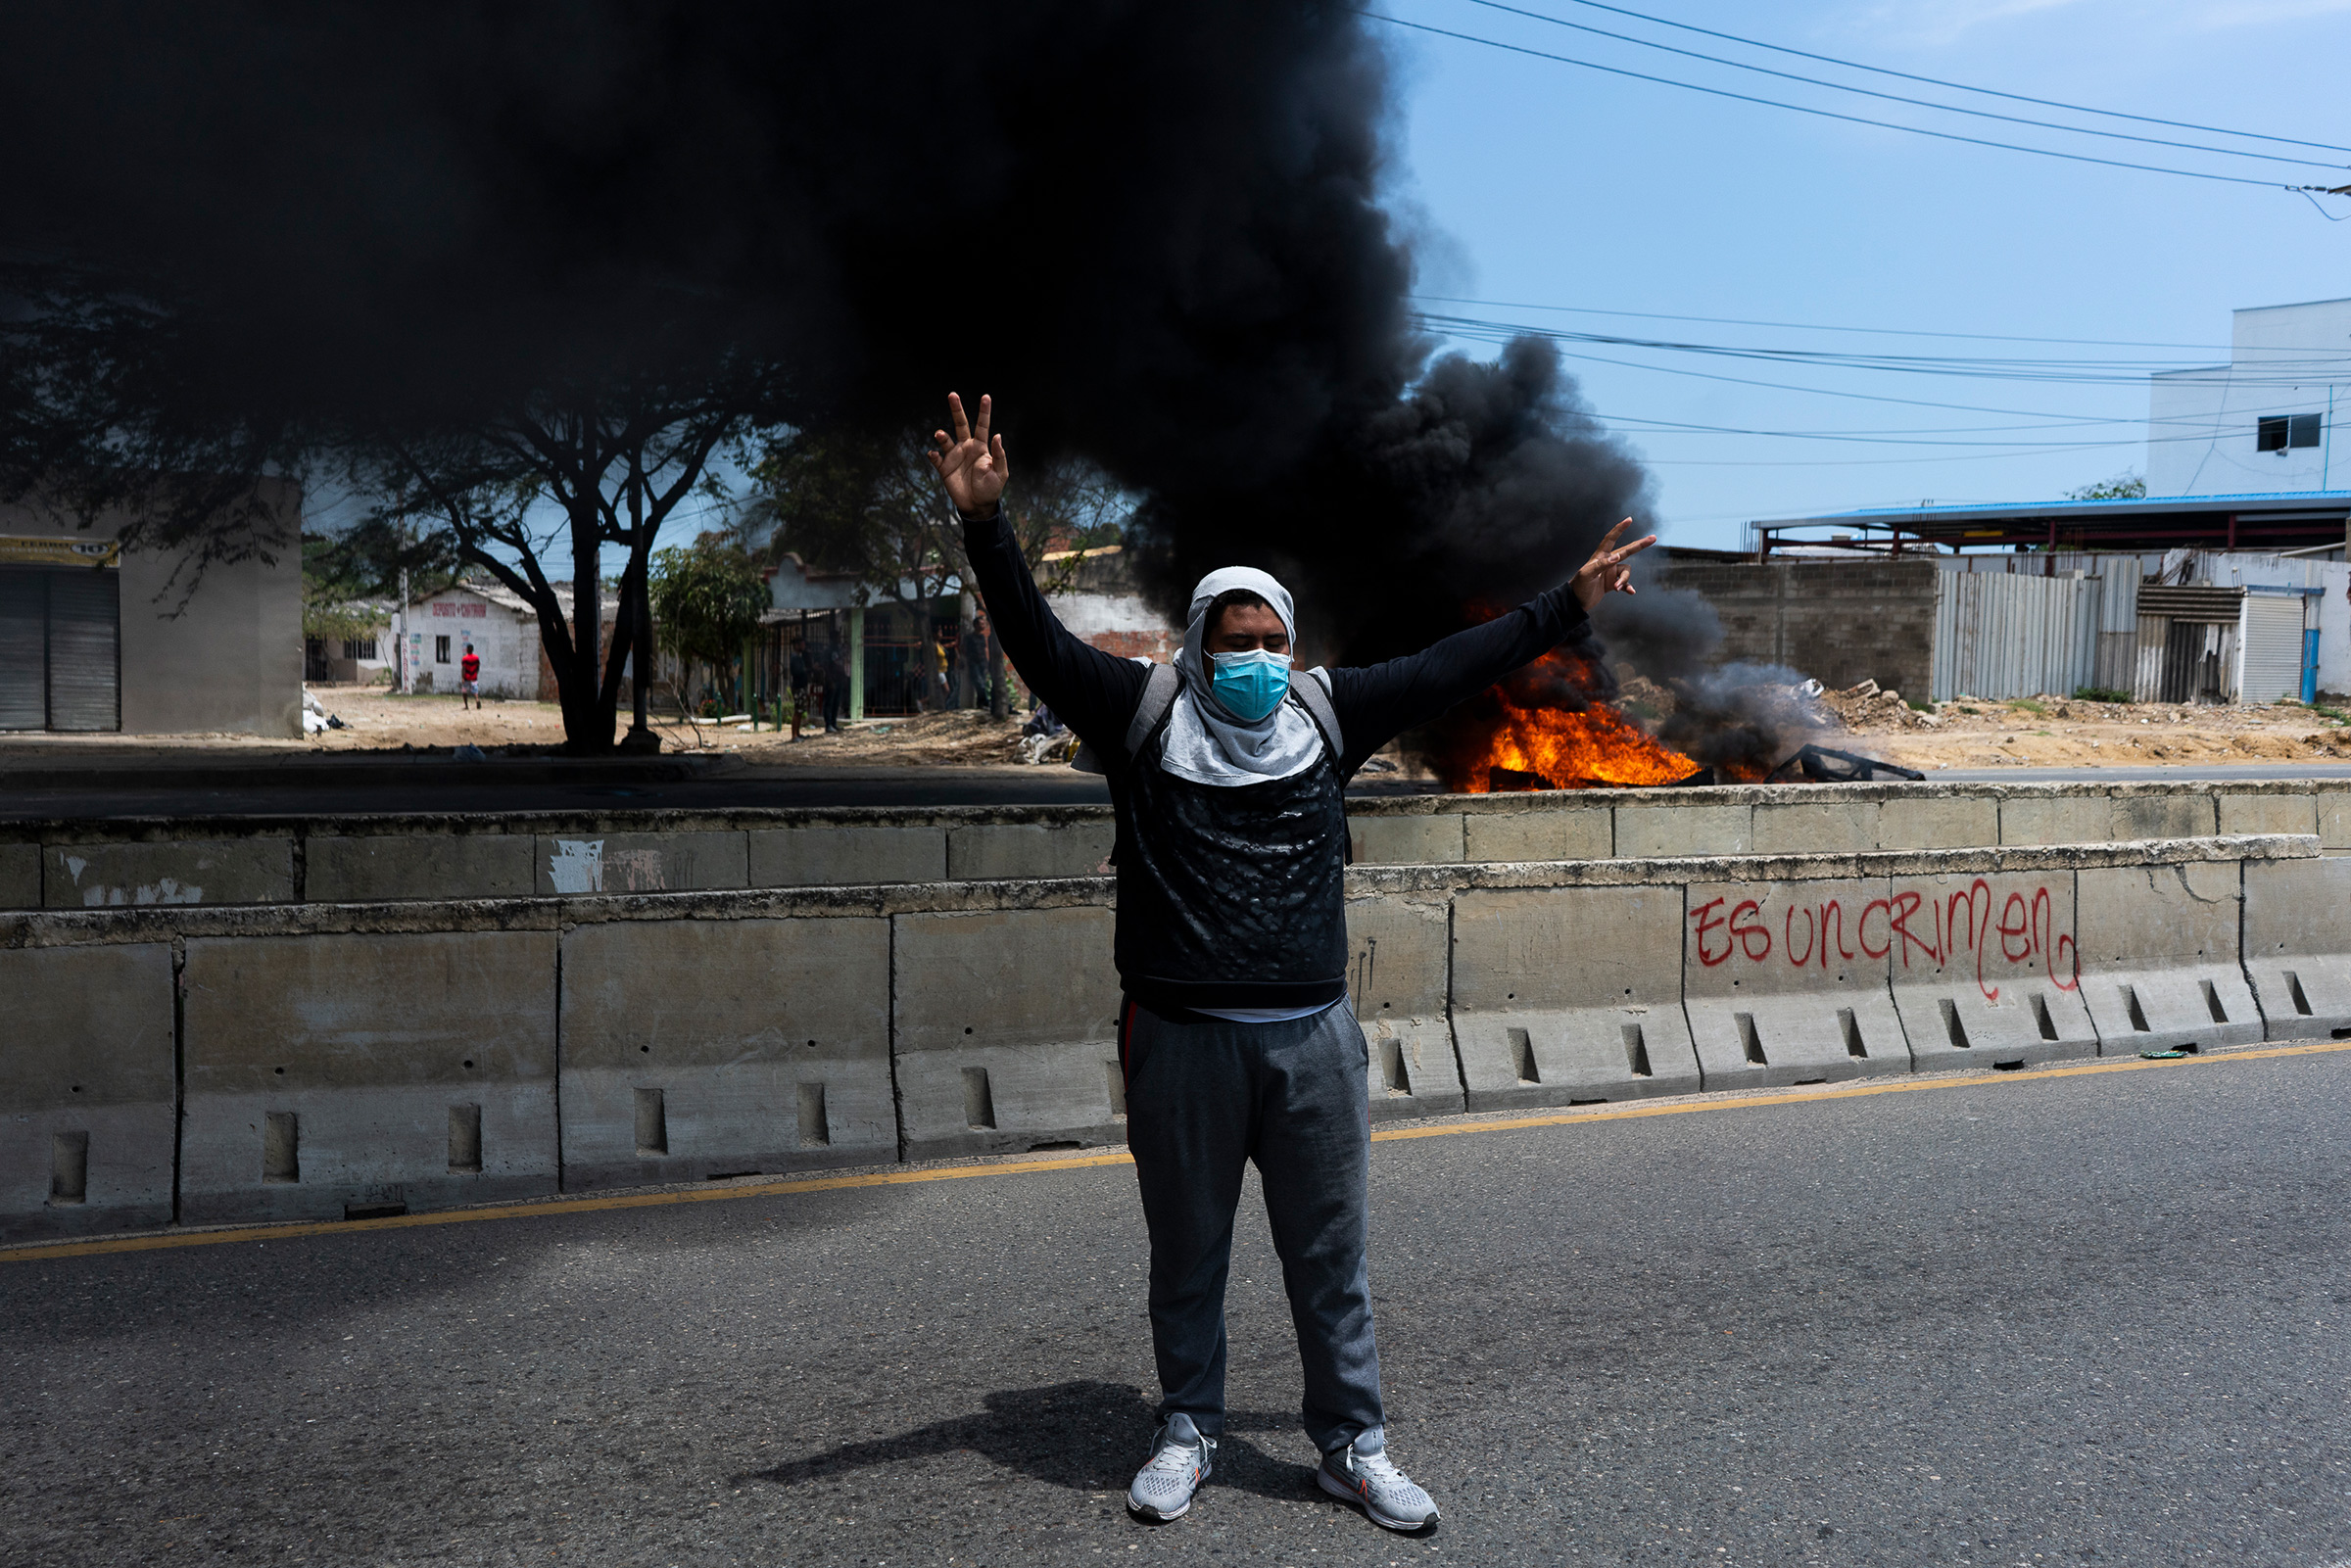 A protester raises his hands in the middle of clashes with the police in Barranquilla on May 1. (Charlie Cordero—Reojo Colectivo)